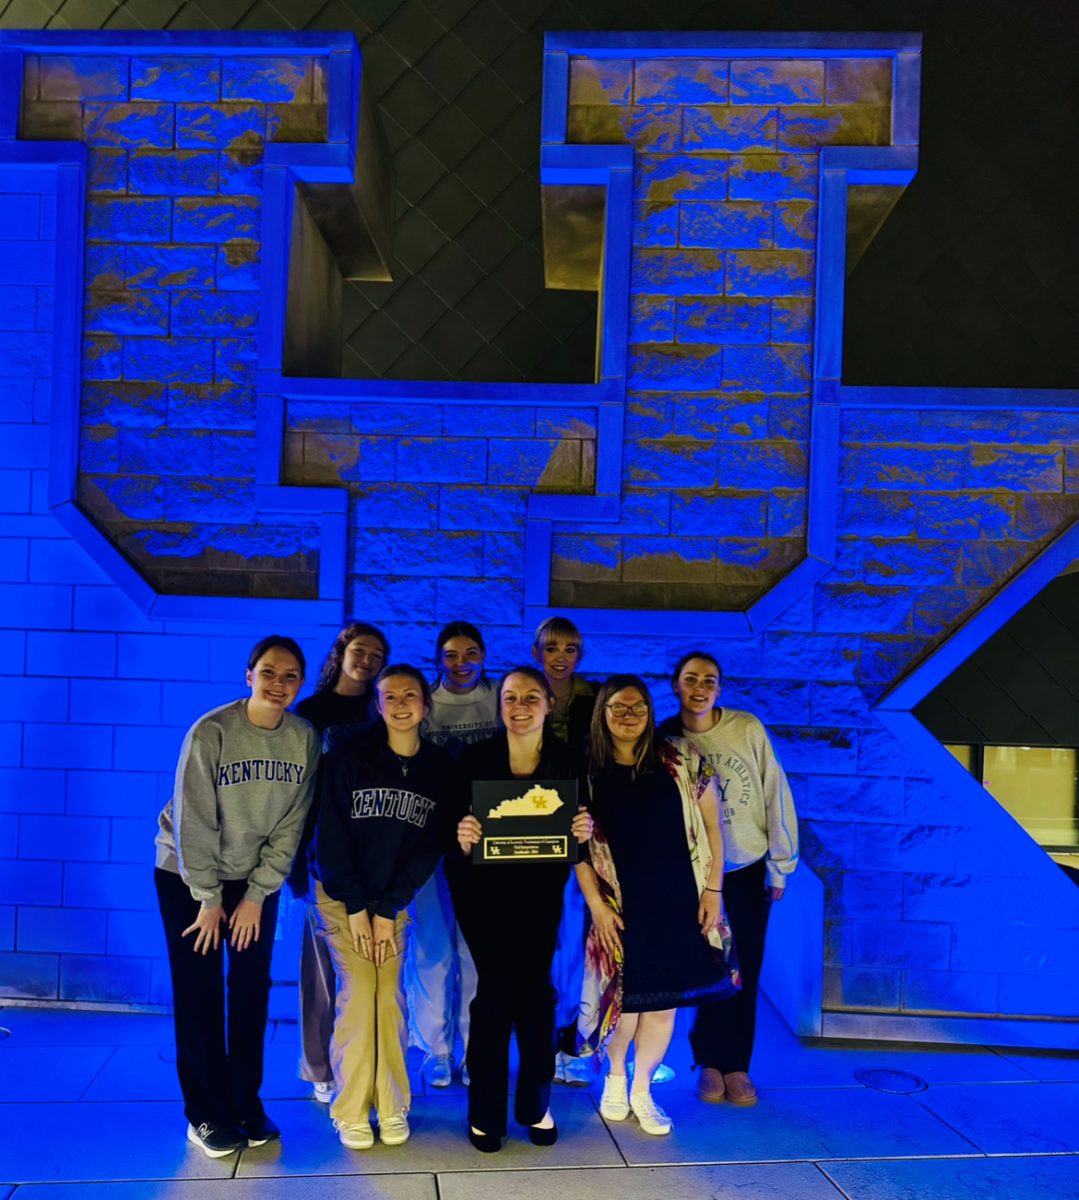 Members of the WPHS Speech and Debate team who attended the national tournament at the University of Kentucky